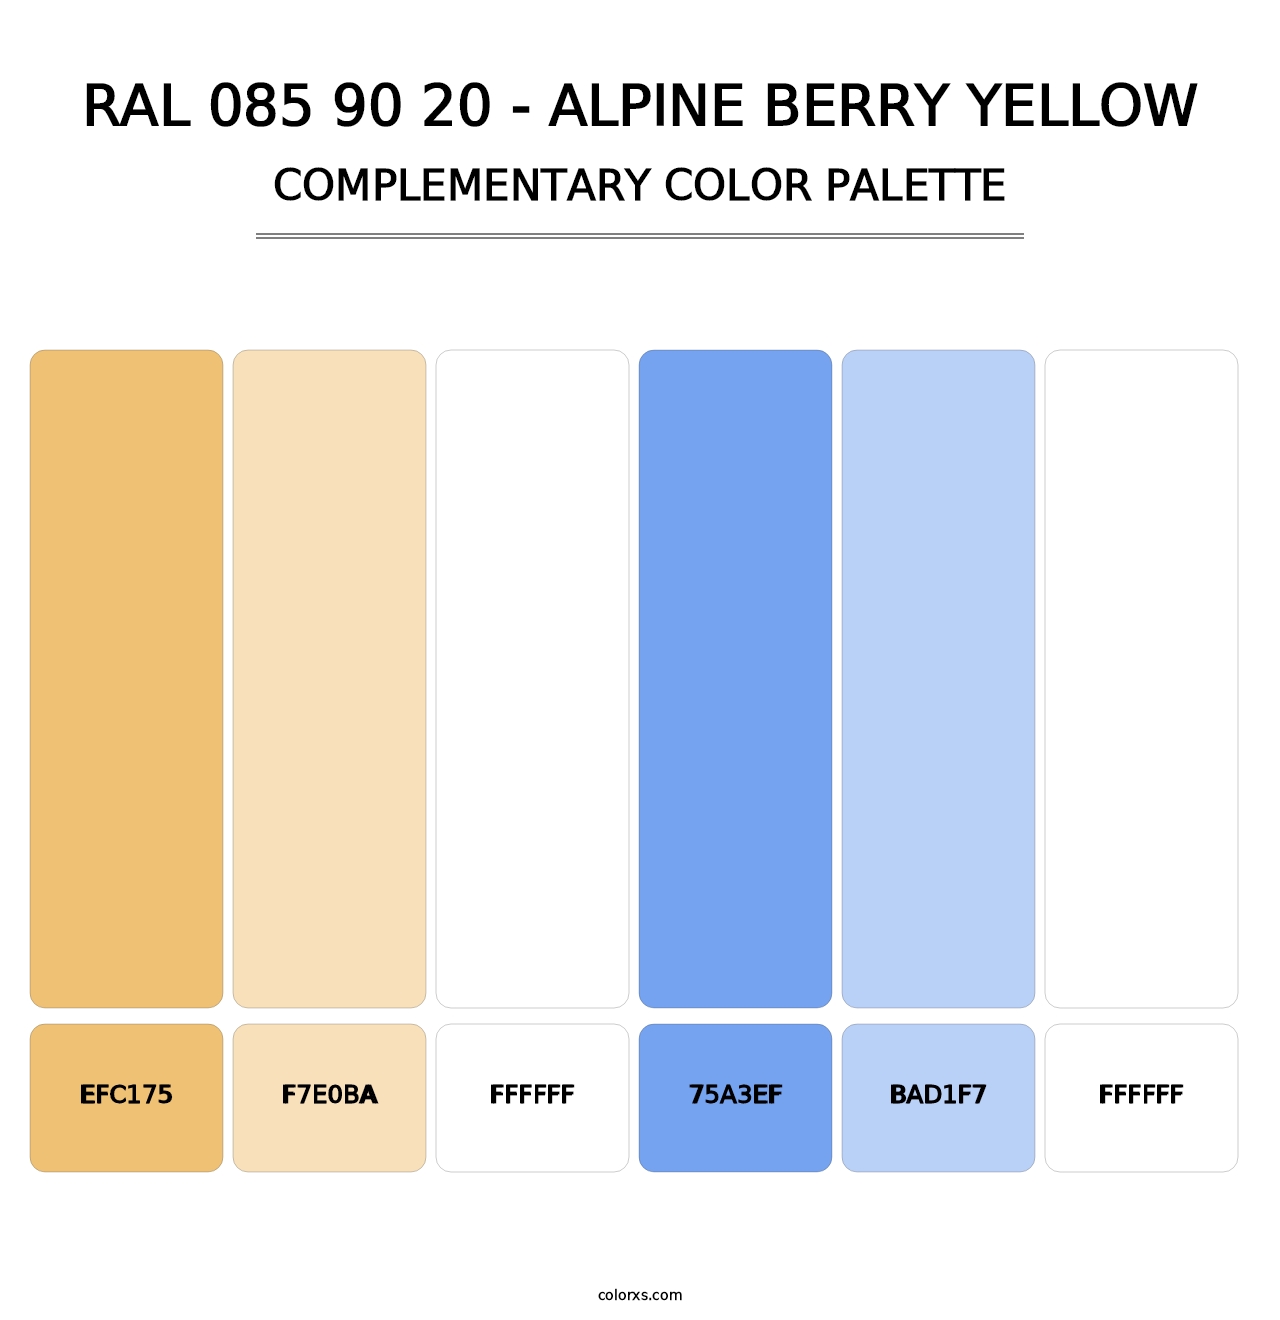 RAL 085 90 20 - Alpine Berry Yellow - Complementary Color Palette